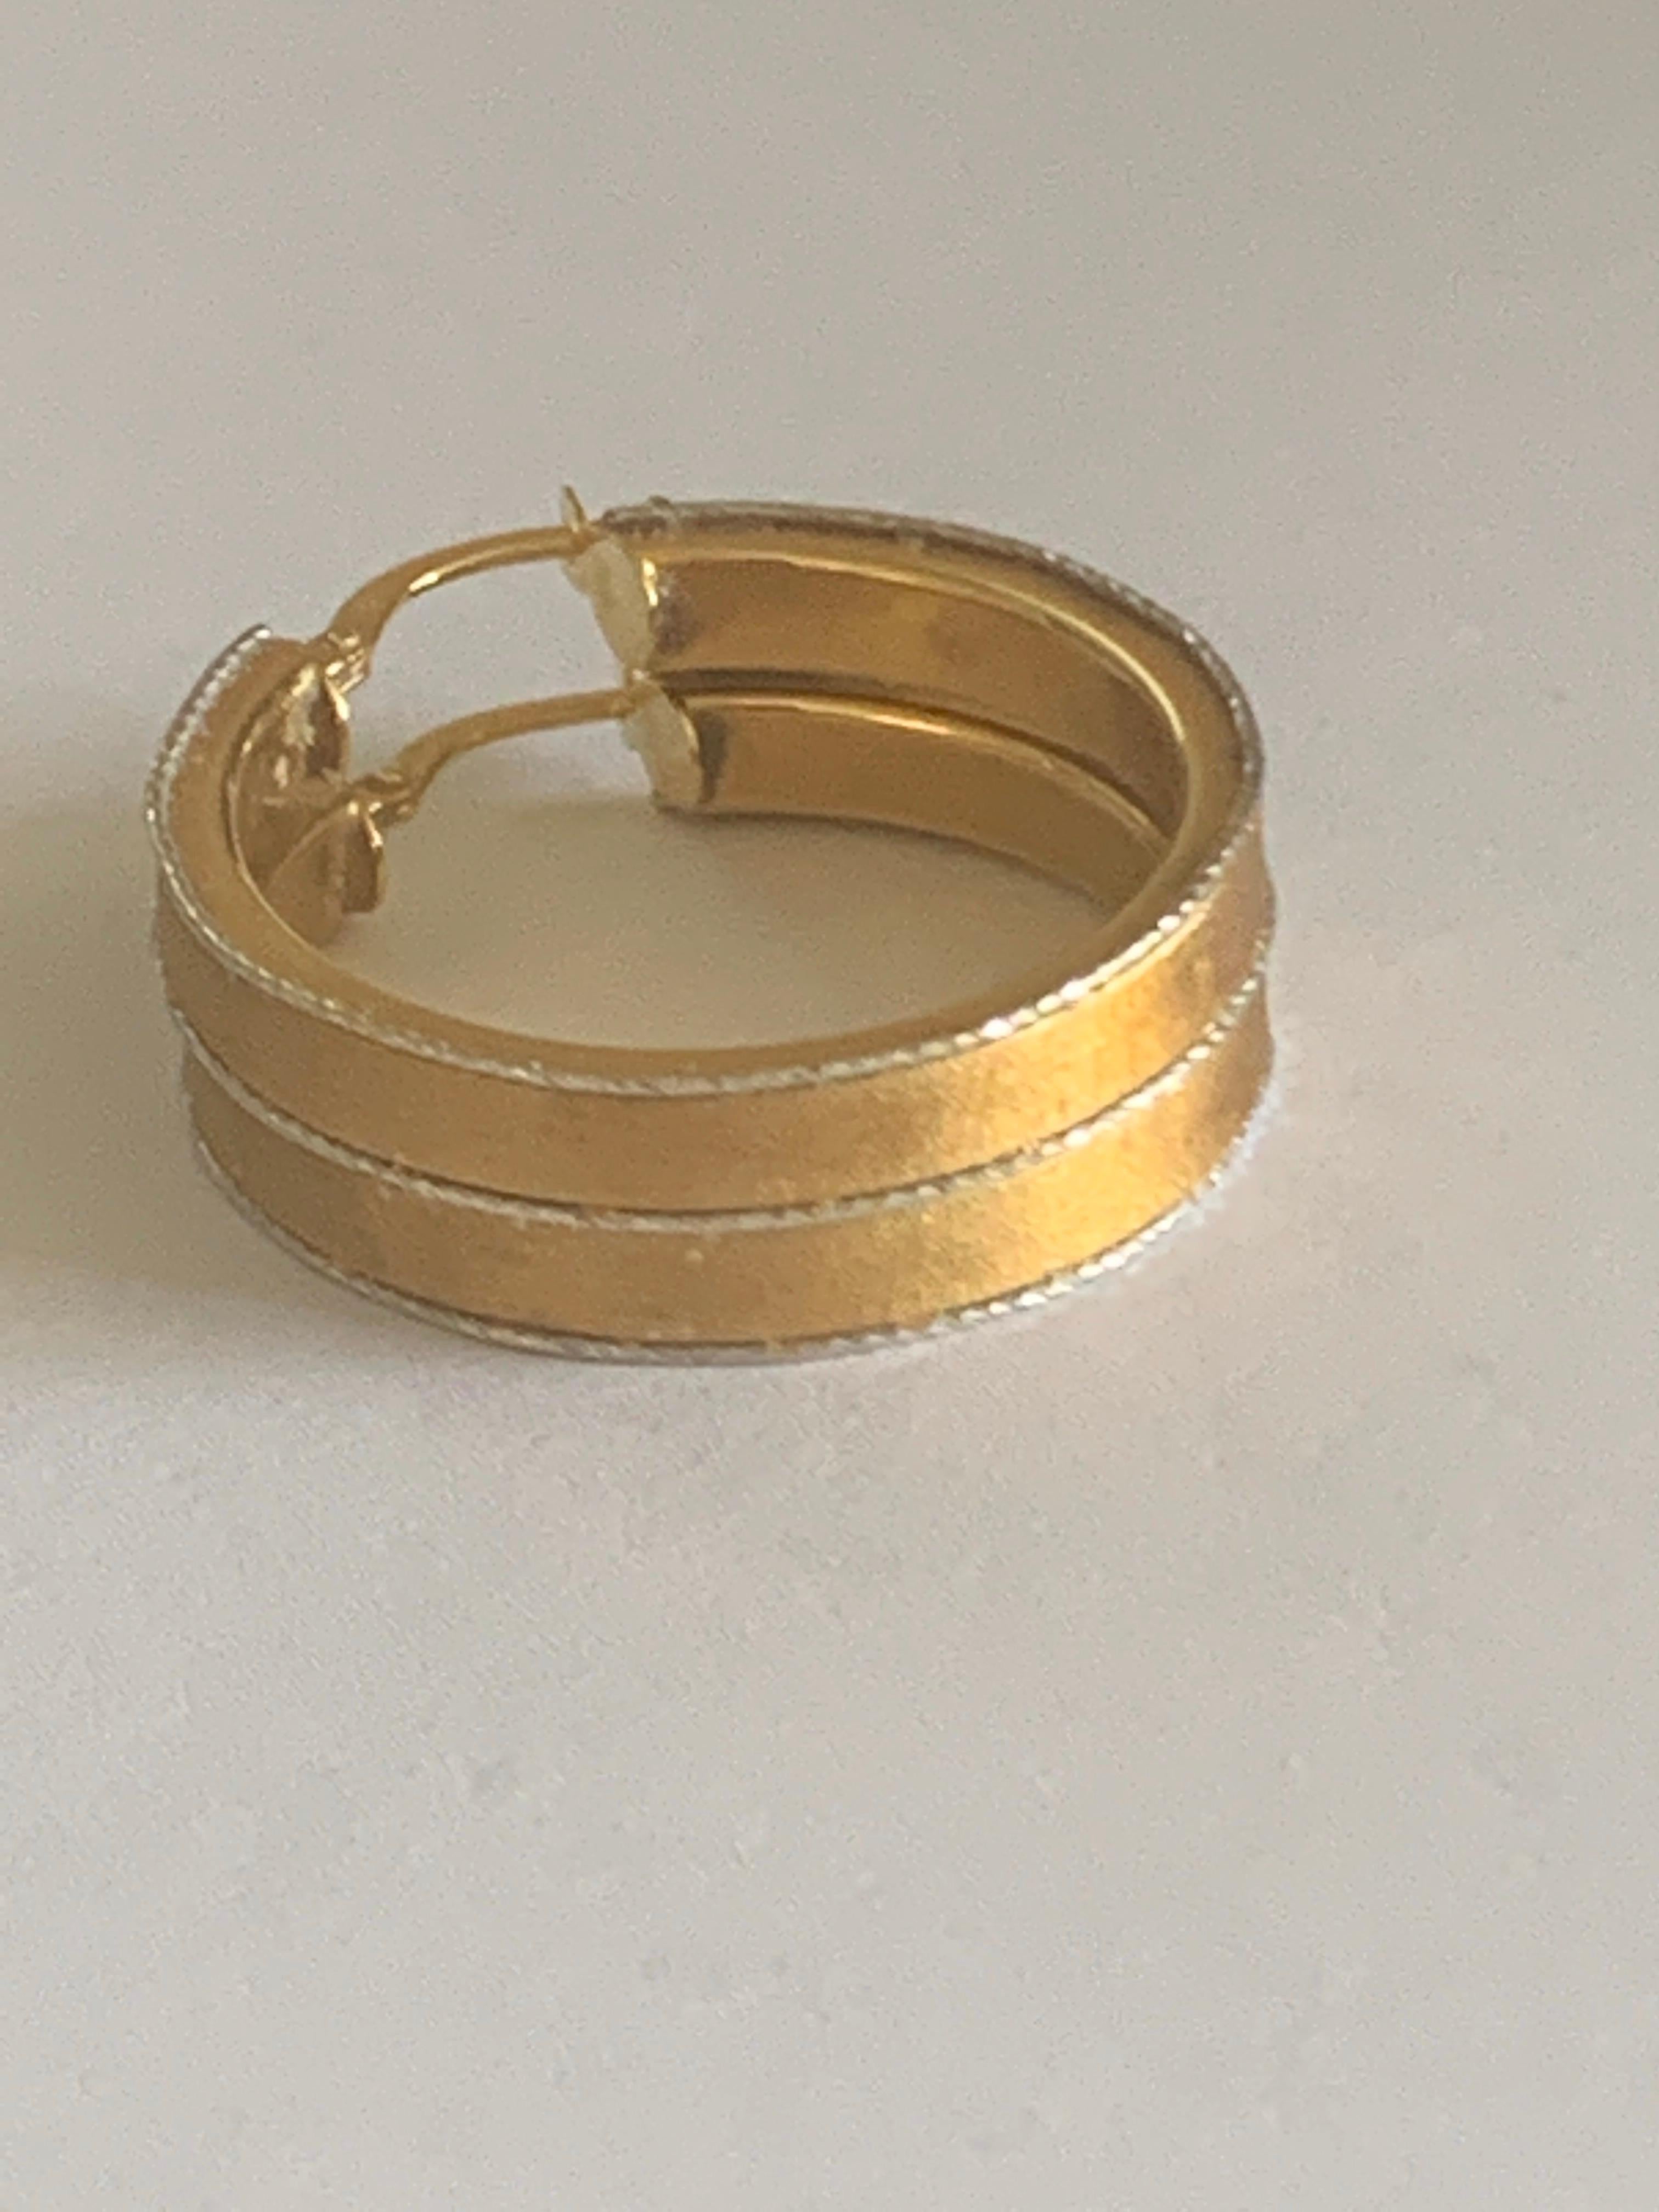 Beautiful Shimmering
18ct 750 Gold Hoop earrings

Yellow Gold sand blasted texture with glistening white gold trim
which are highly polished internally
truly beautiful !

diameter 29mm millimeters ( outer edge to outer edge )
Thickness 4mm